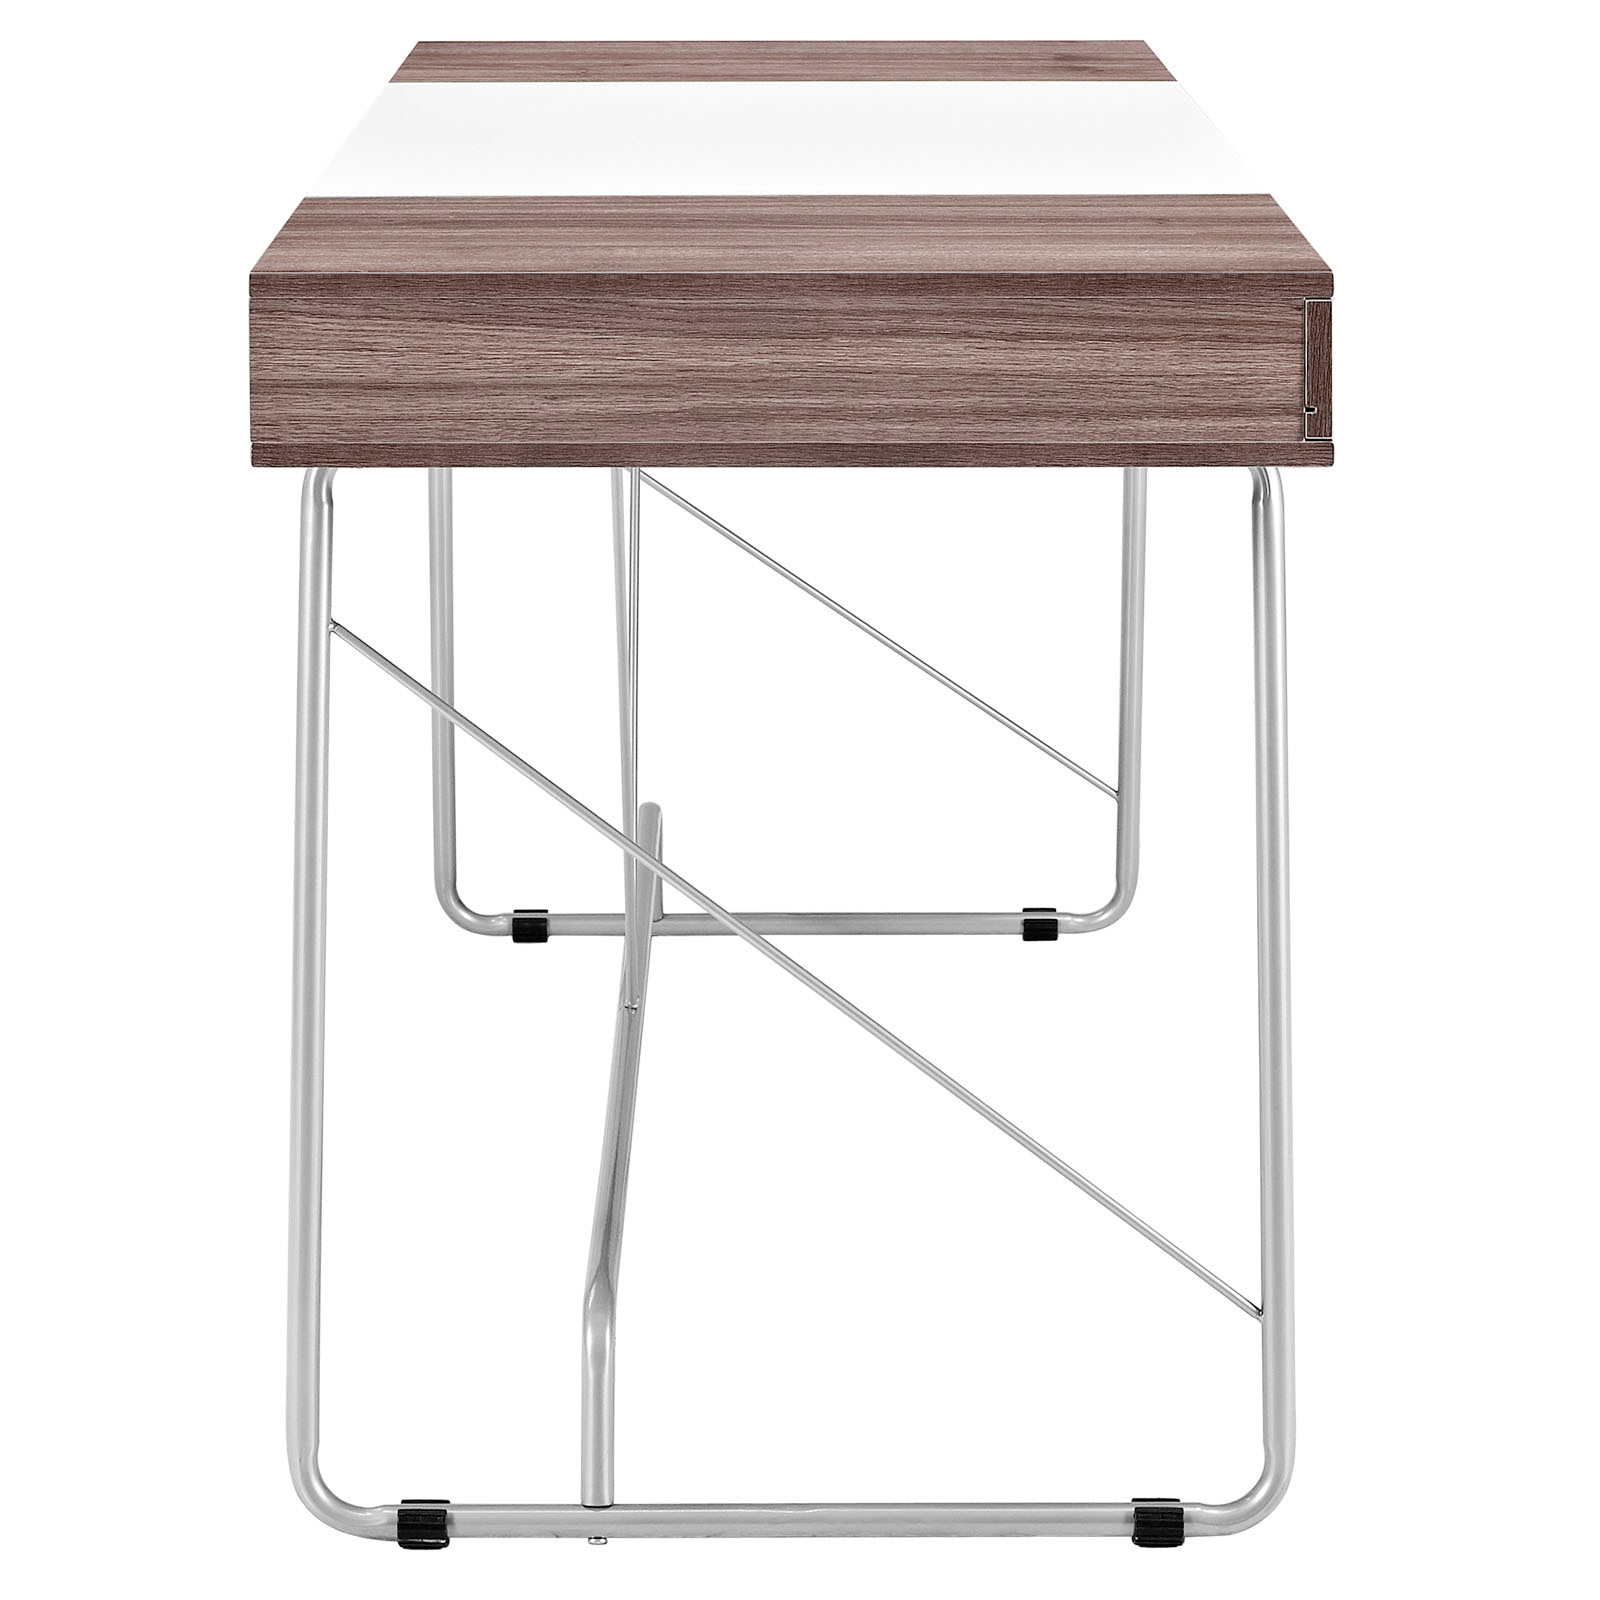 Space saving desk from Modway - Side View - Shown in Birch (Brown)